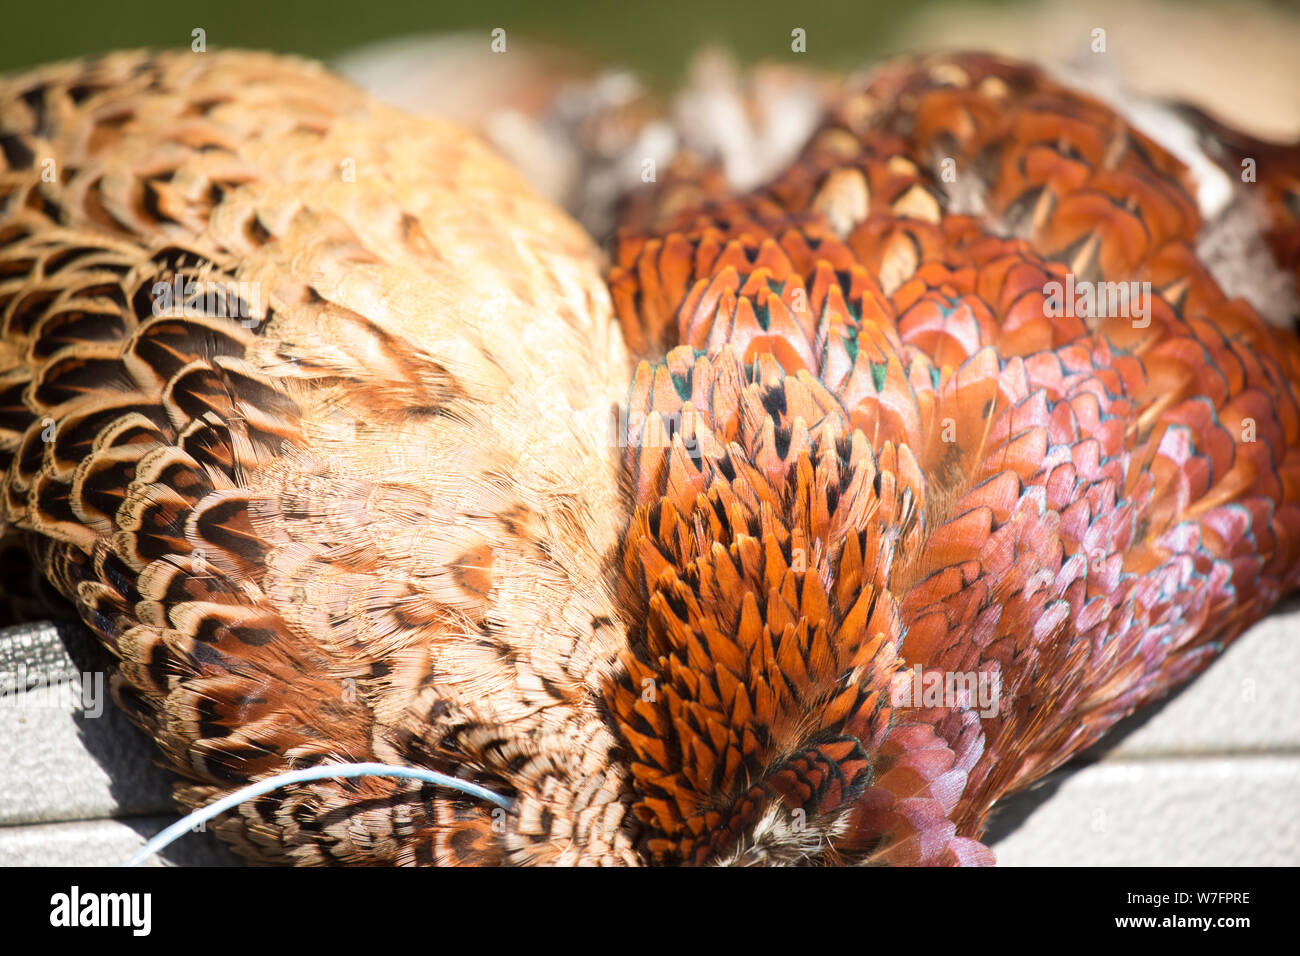 A Brace of Pheasants Showing the Contrast Between the Male and Female Plumage Stock Photo